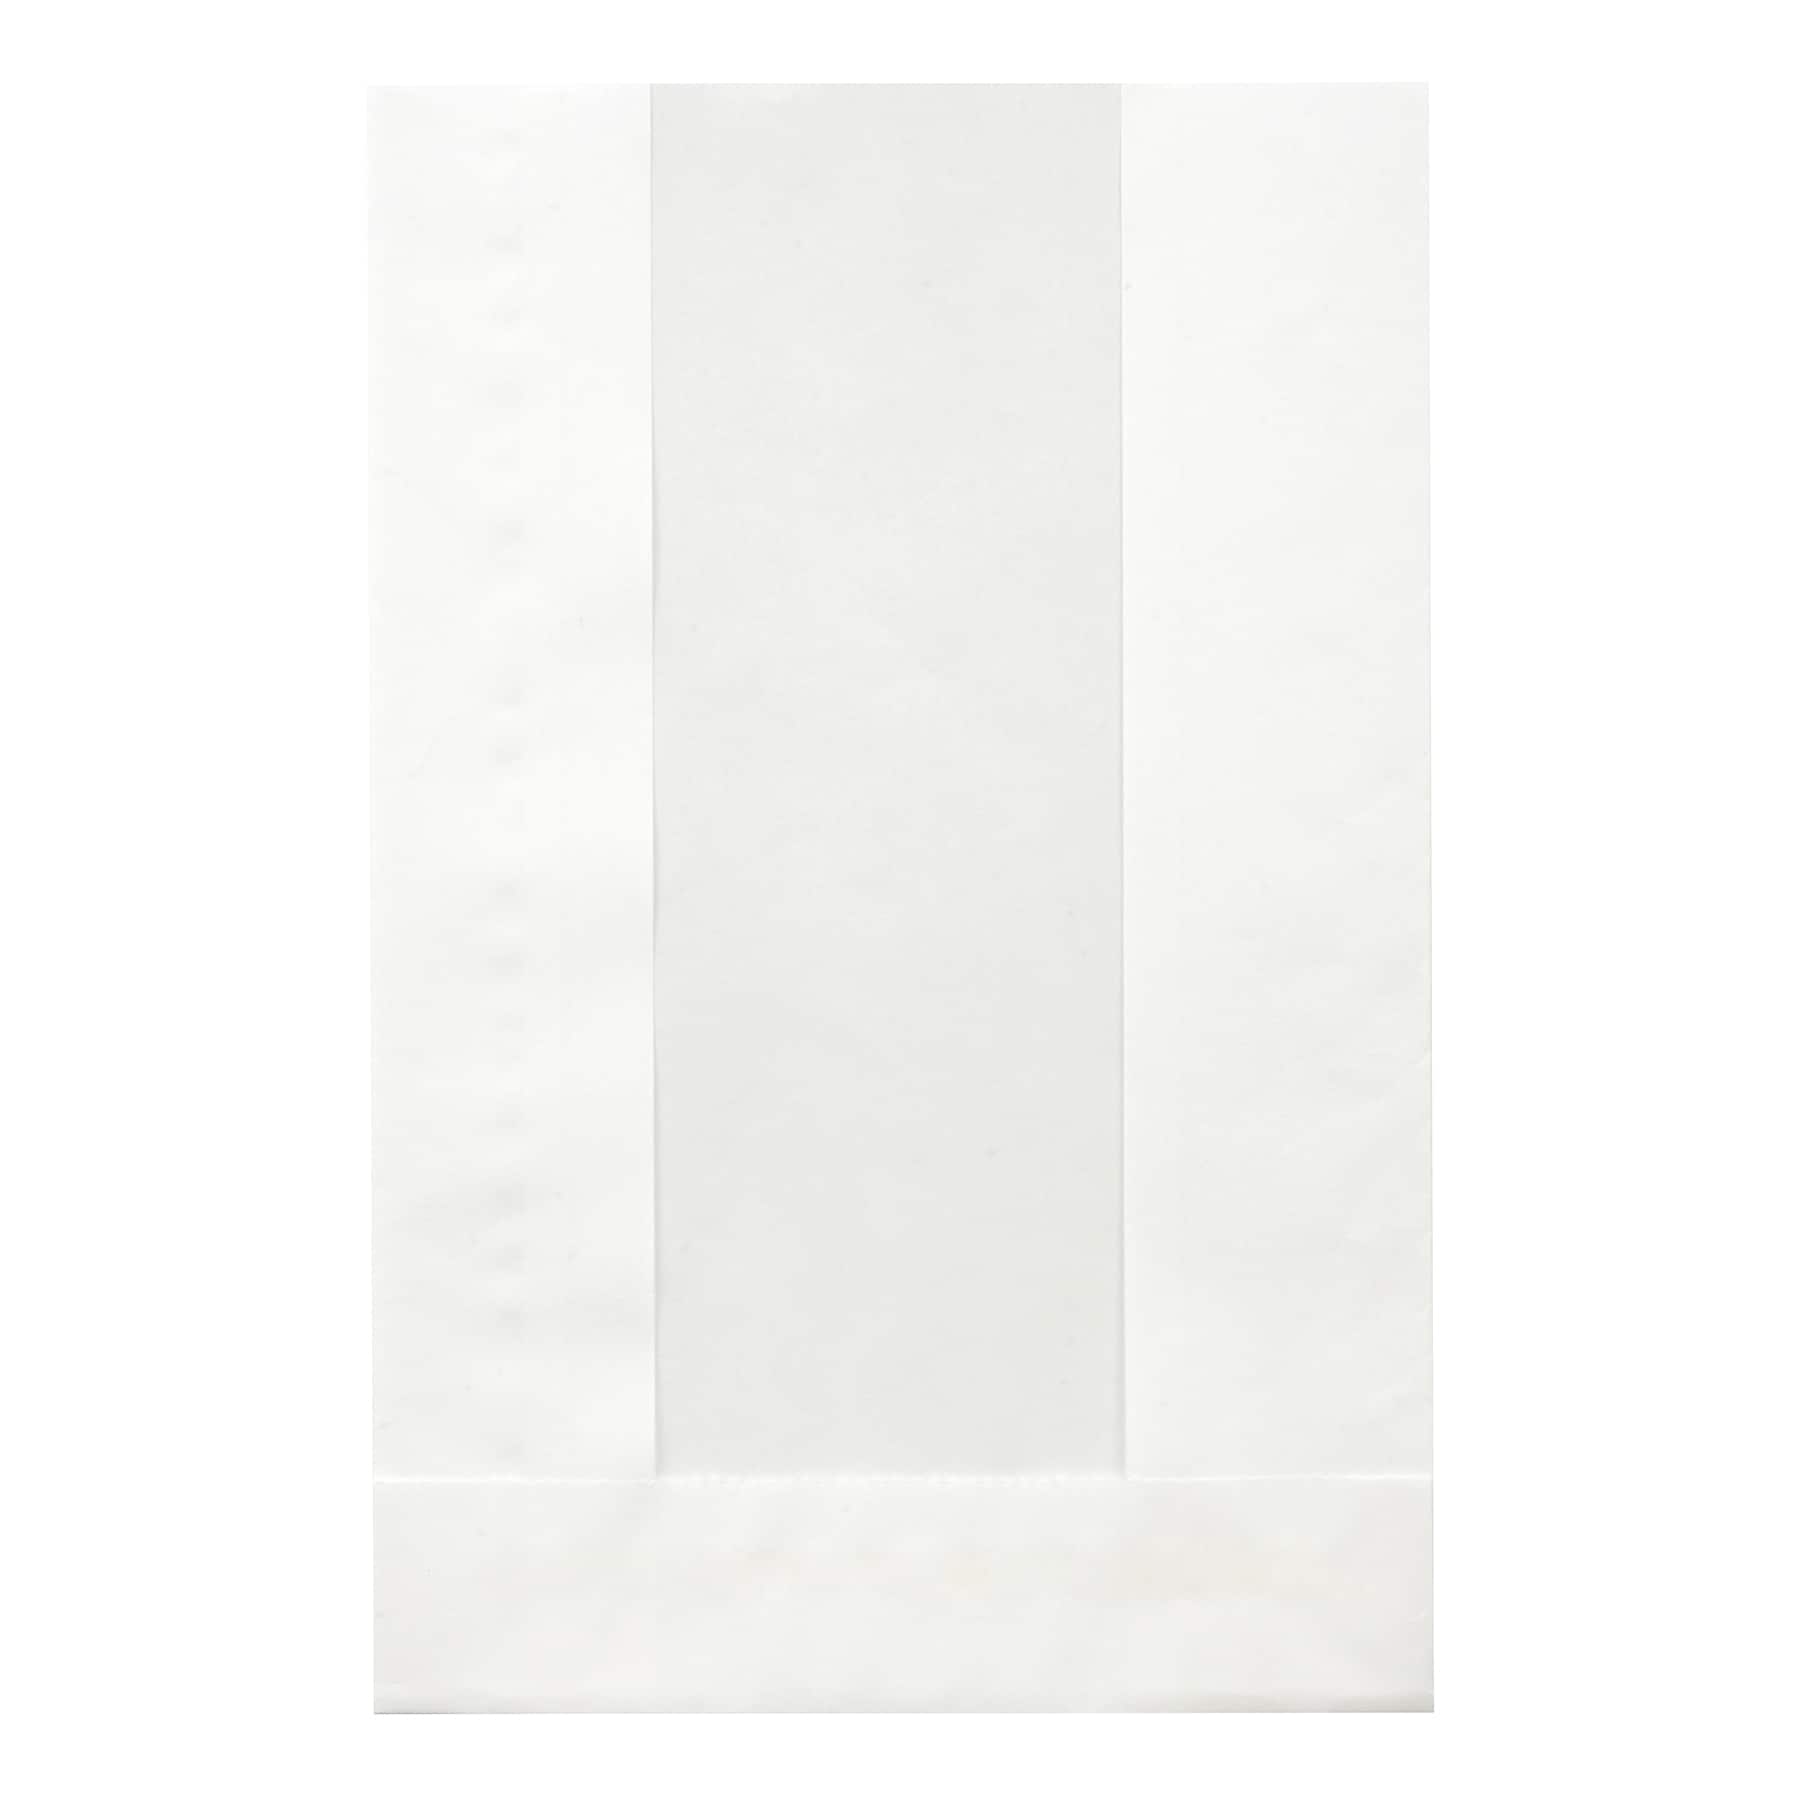 12 Packs: 25 ct. (300 total) White Grease-Resistant Window Treat Bags by Celebrate It&#xAE;